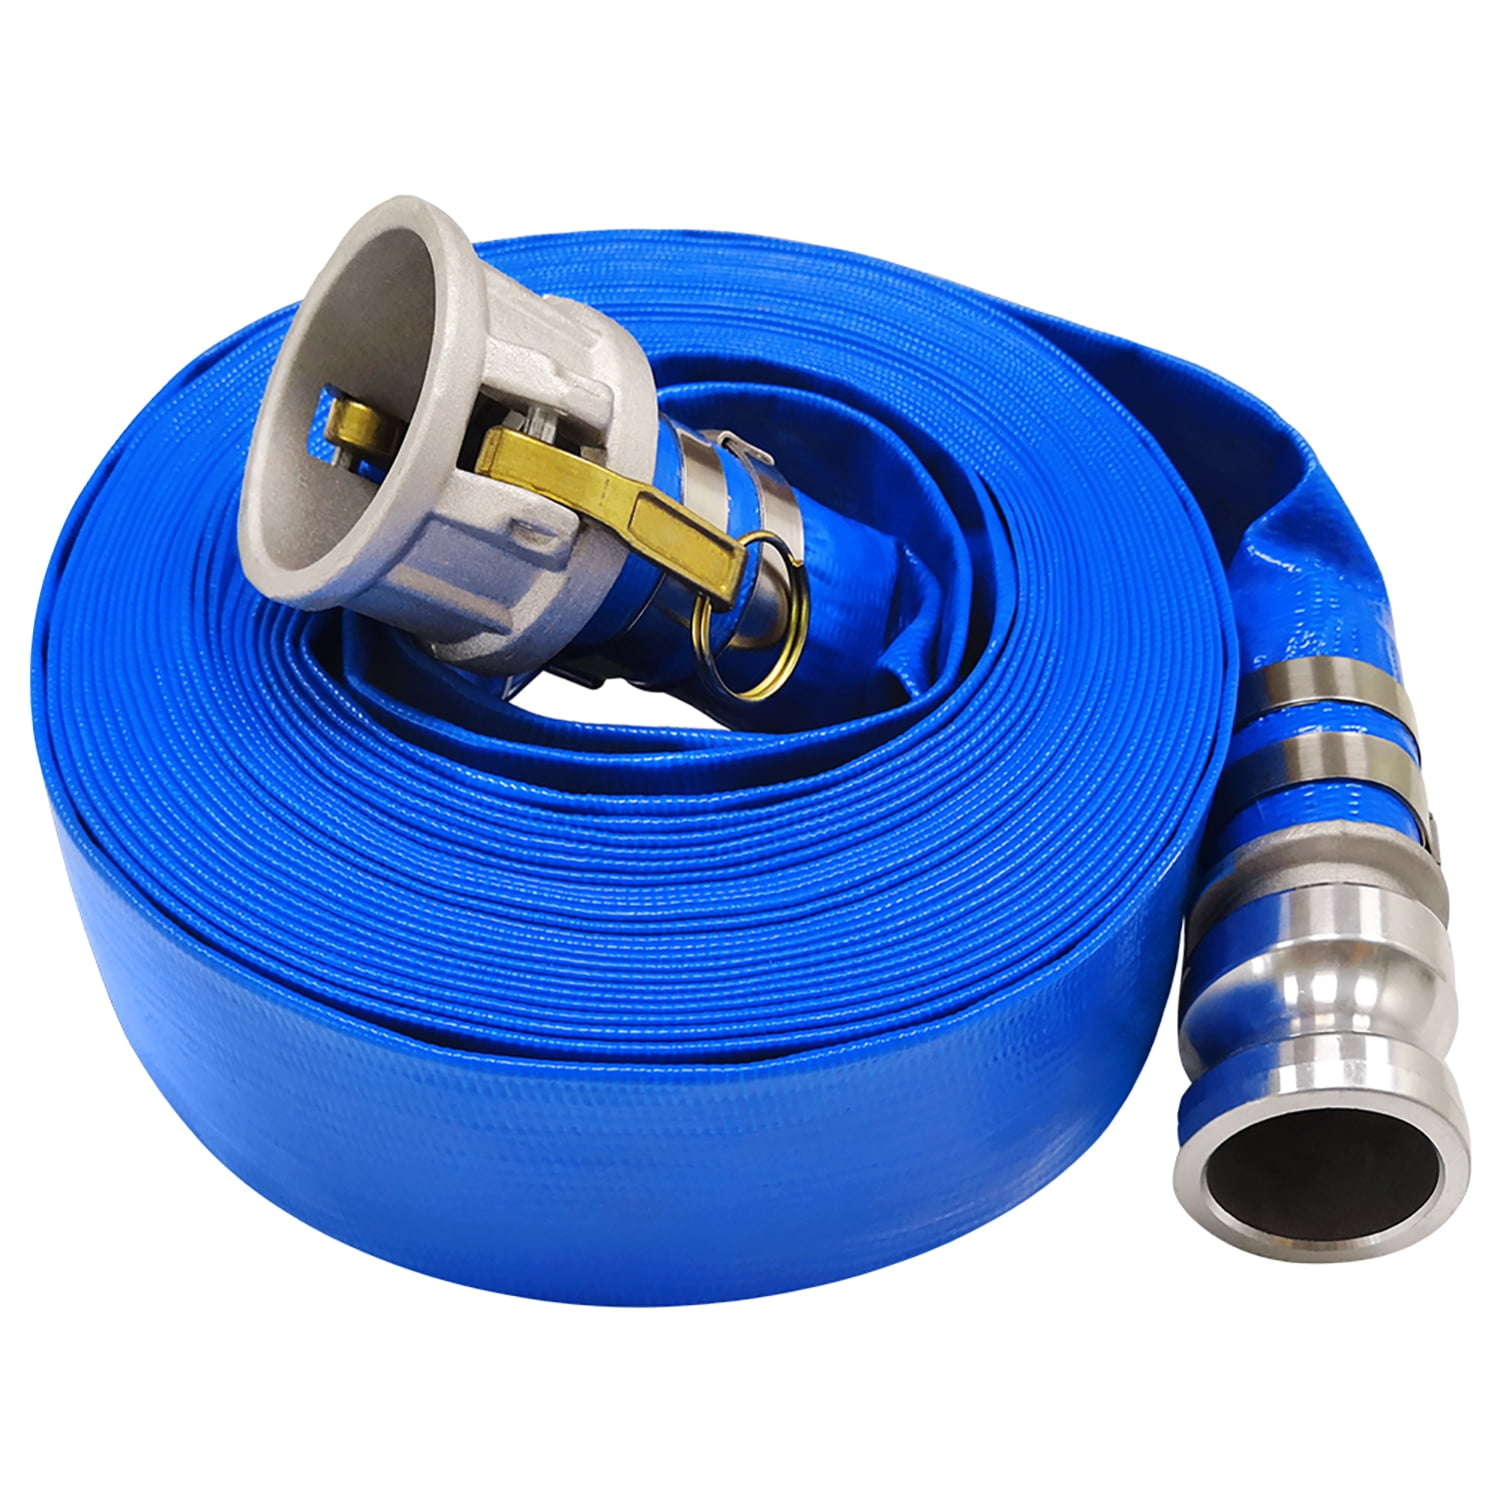 Blue PVC Layflat Hose Water Discharge Pump Delivery Pipe 4 BAR 1" 1¼" 1½" 2" 3" 